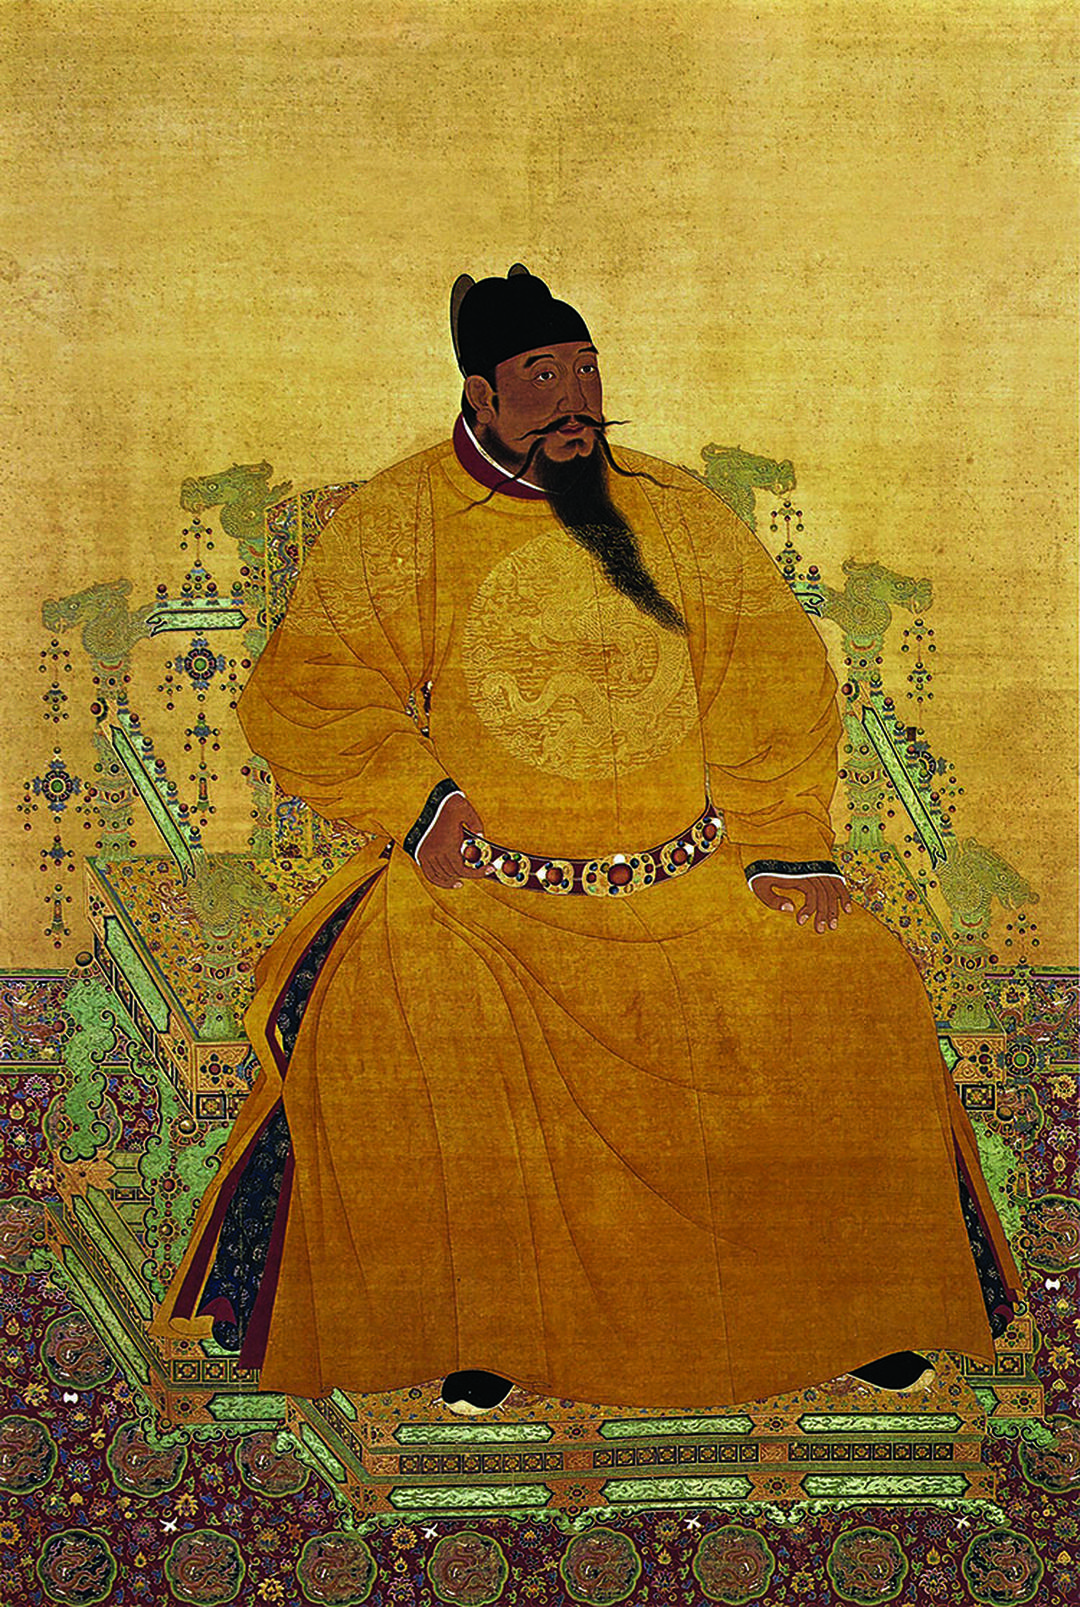 Portrait of the Yongle Emperor